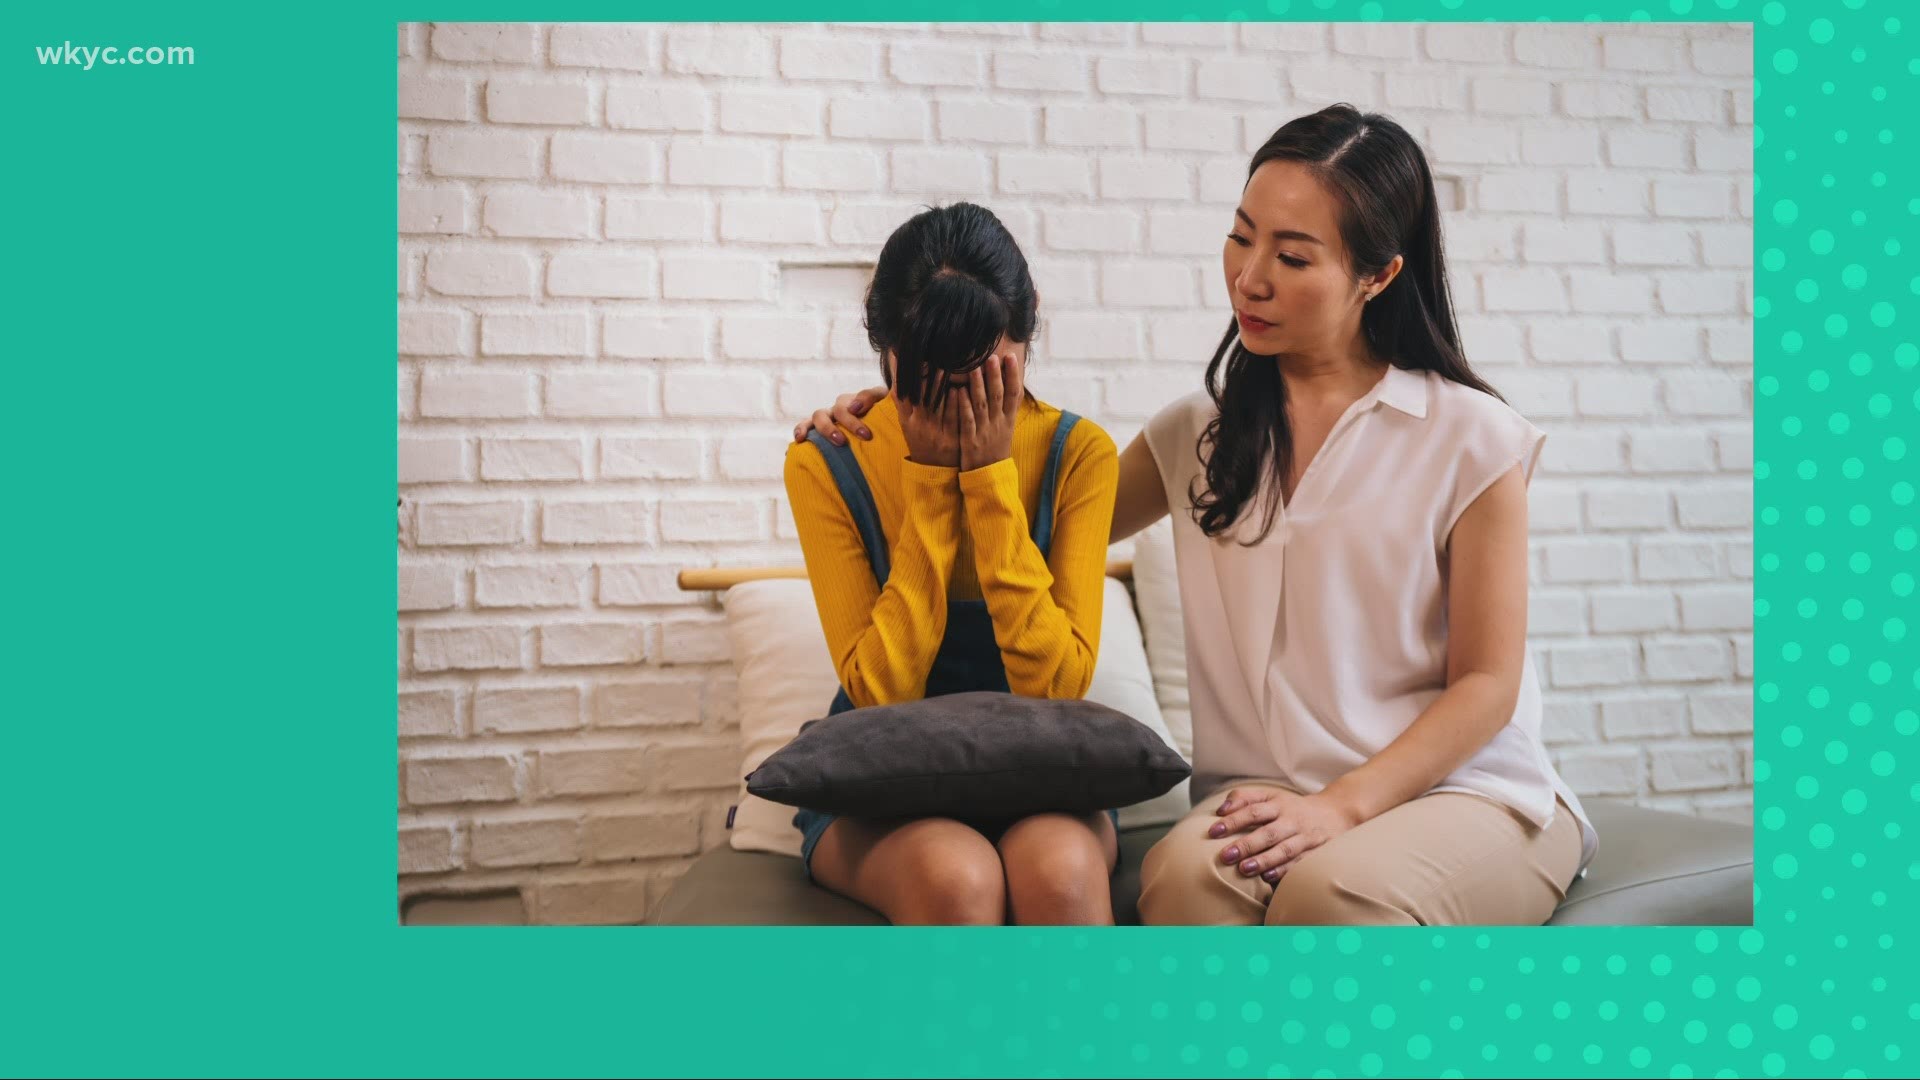 In our series, 'Mom Minute Monday,' we take topics that matter to you to the experts. Today, how to stay connected to your teen during the pandemic.